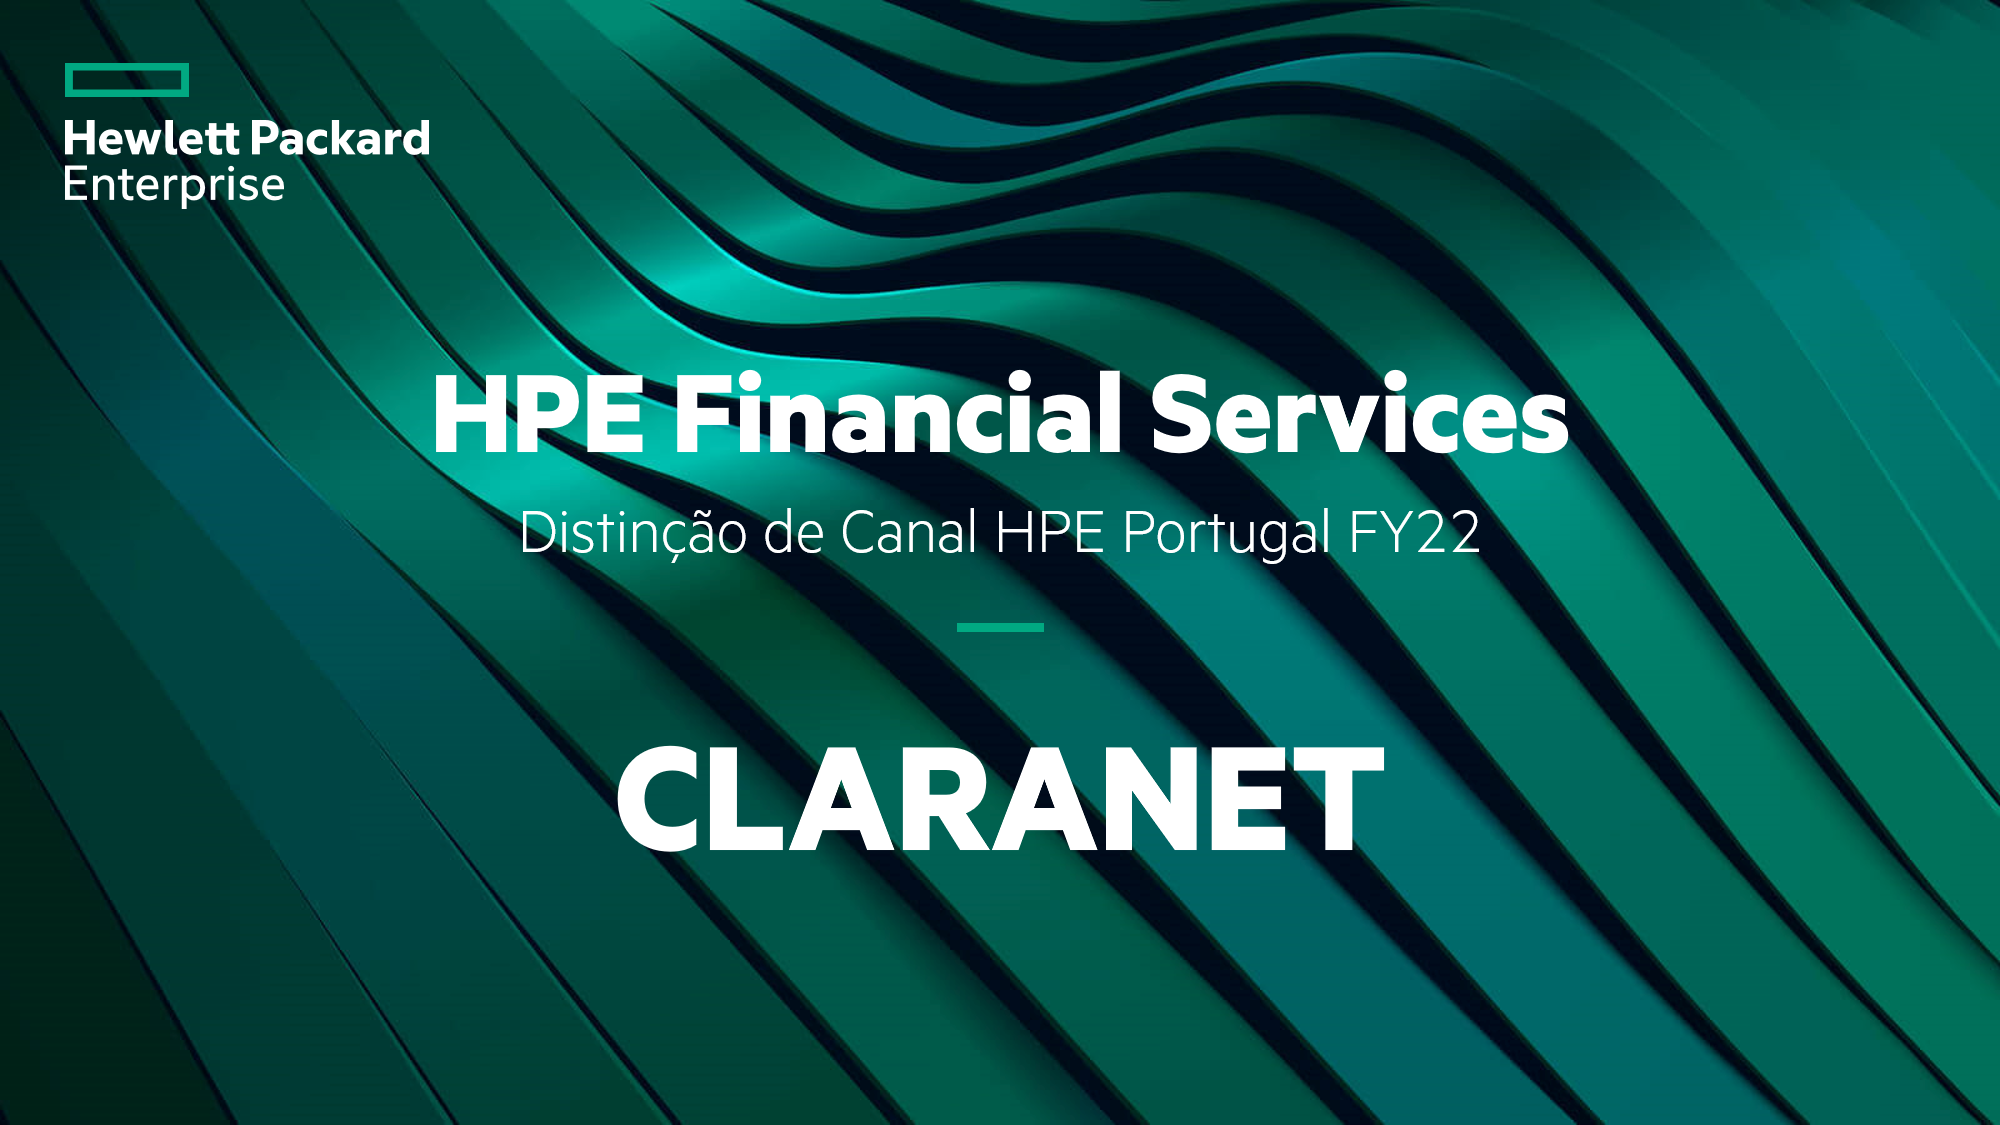 HPE Financial Services - Claranet